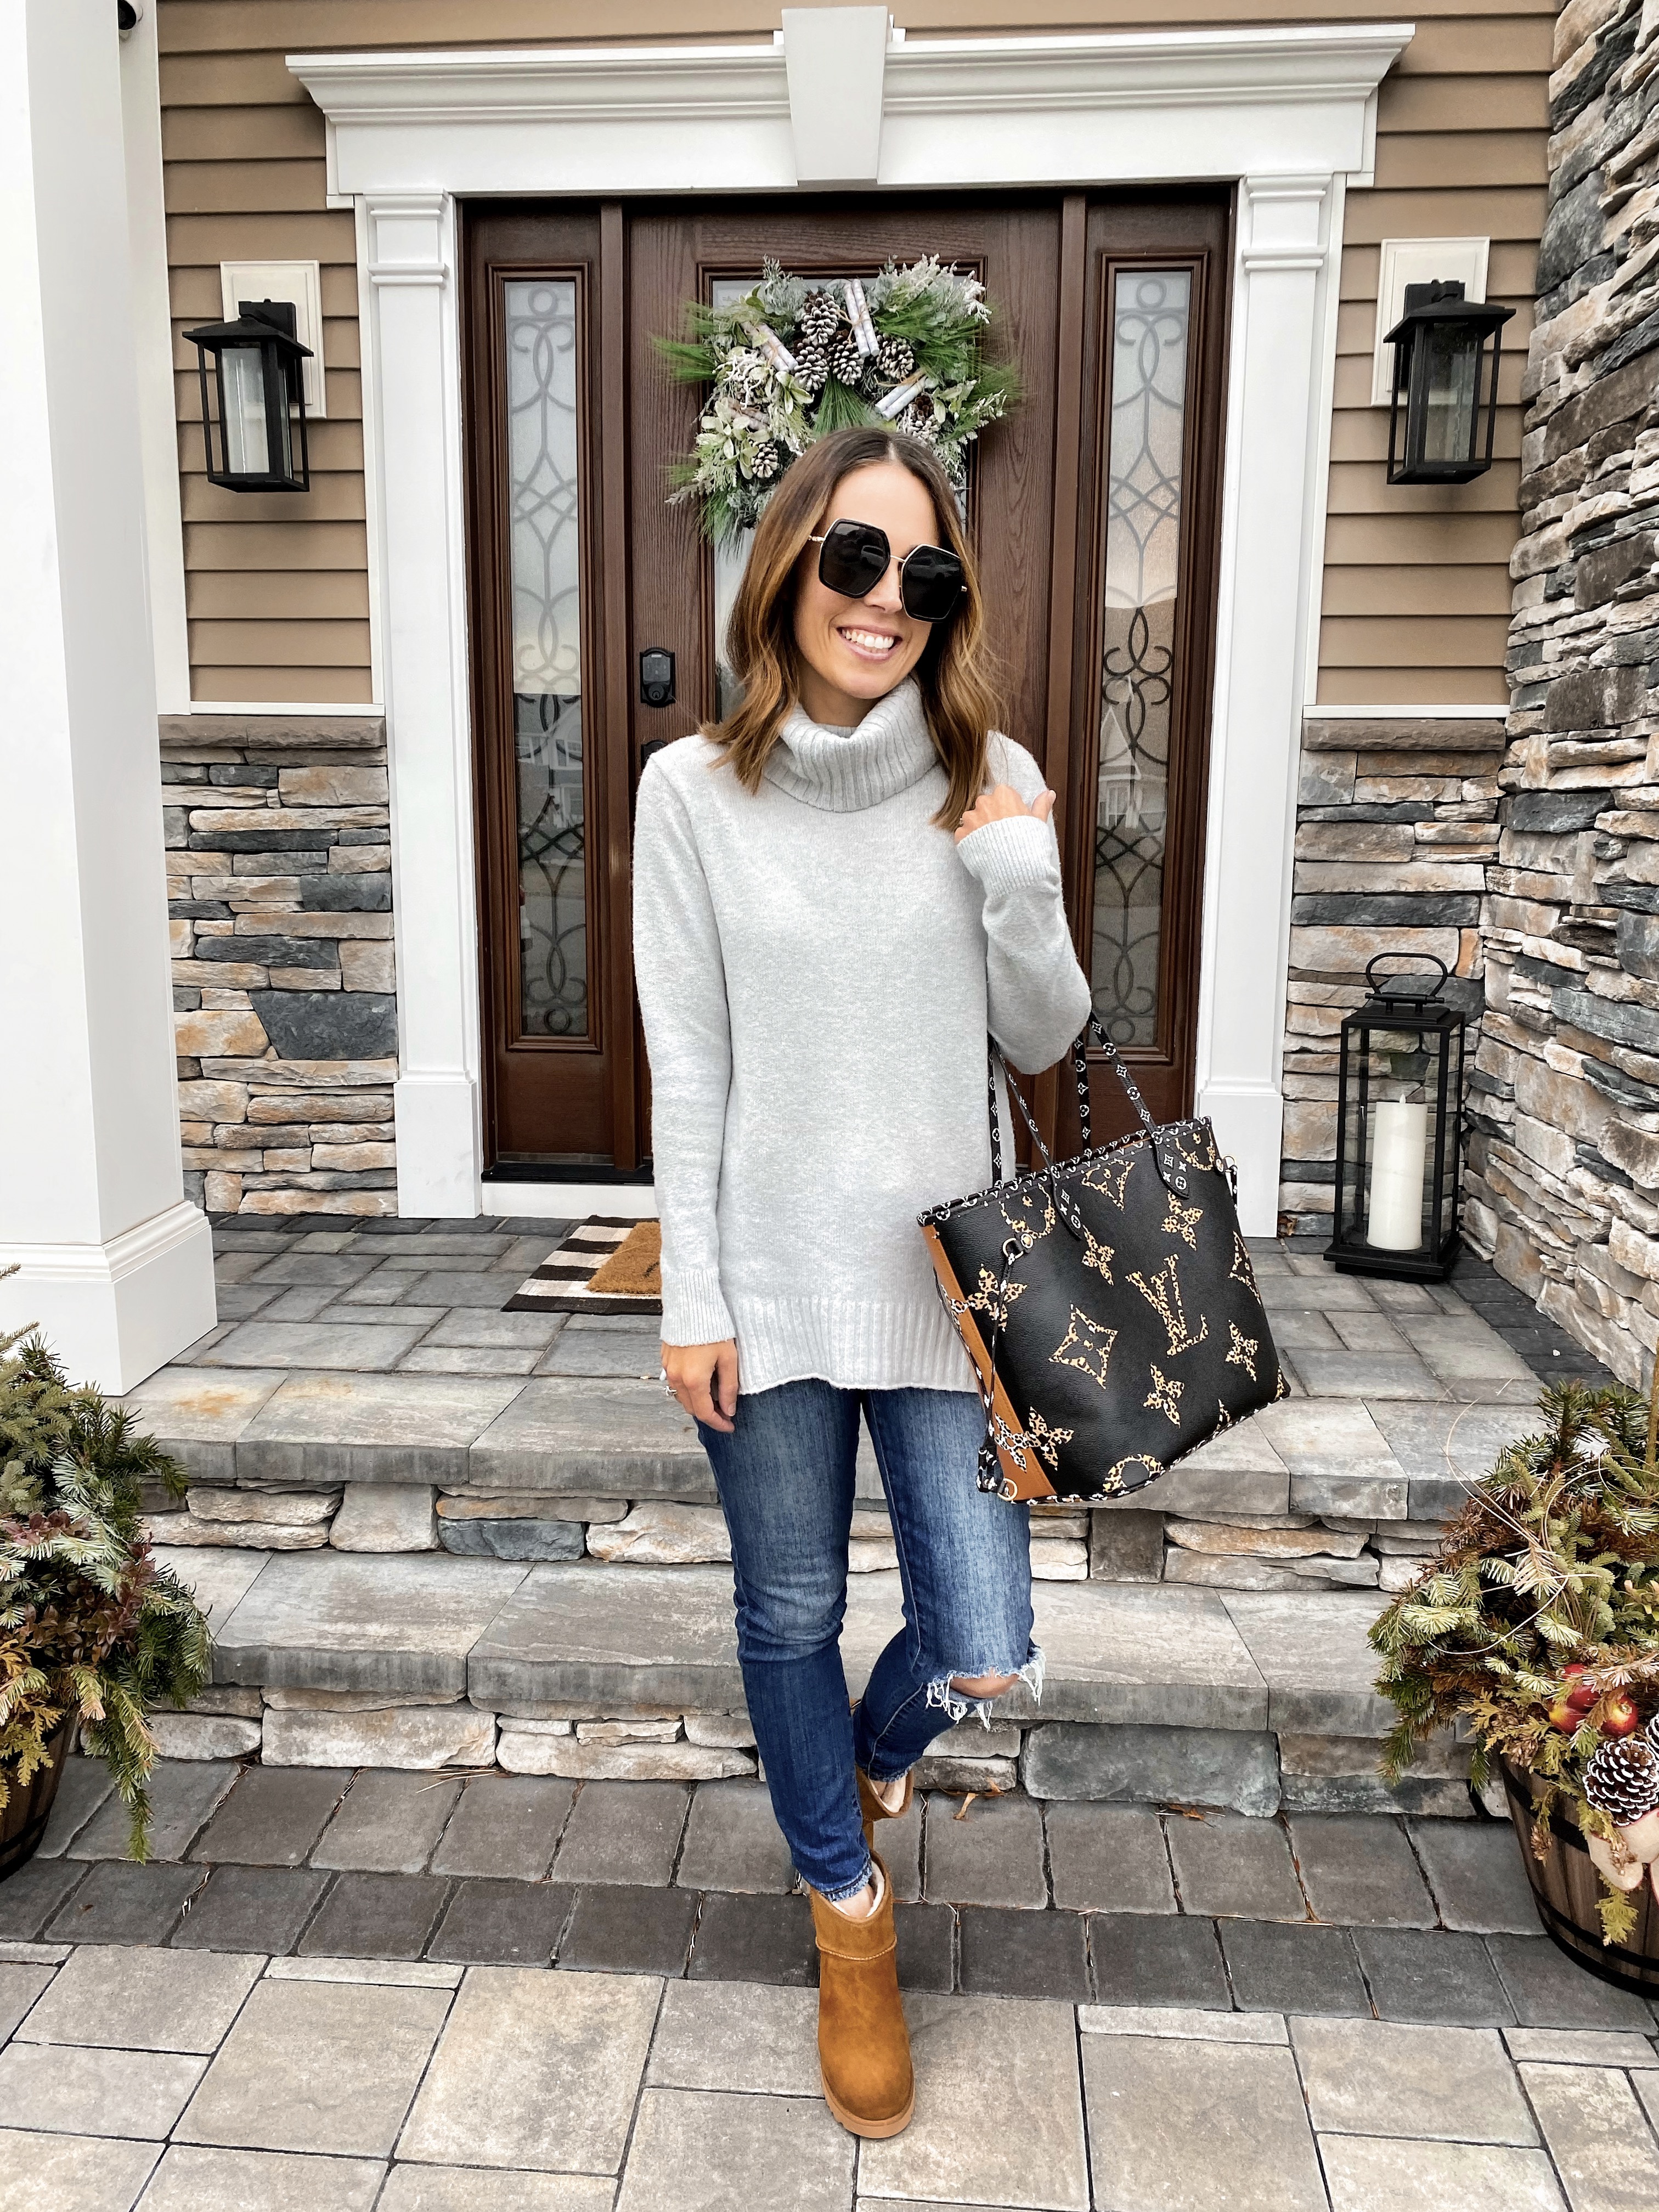 Trust Me! You'll LOVE this $39 Sweater..